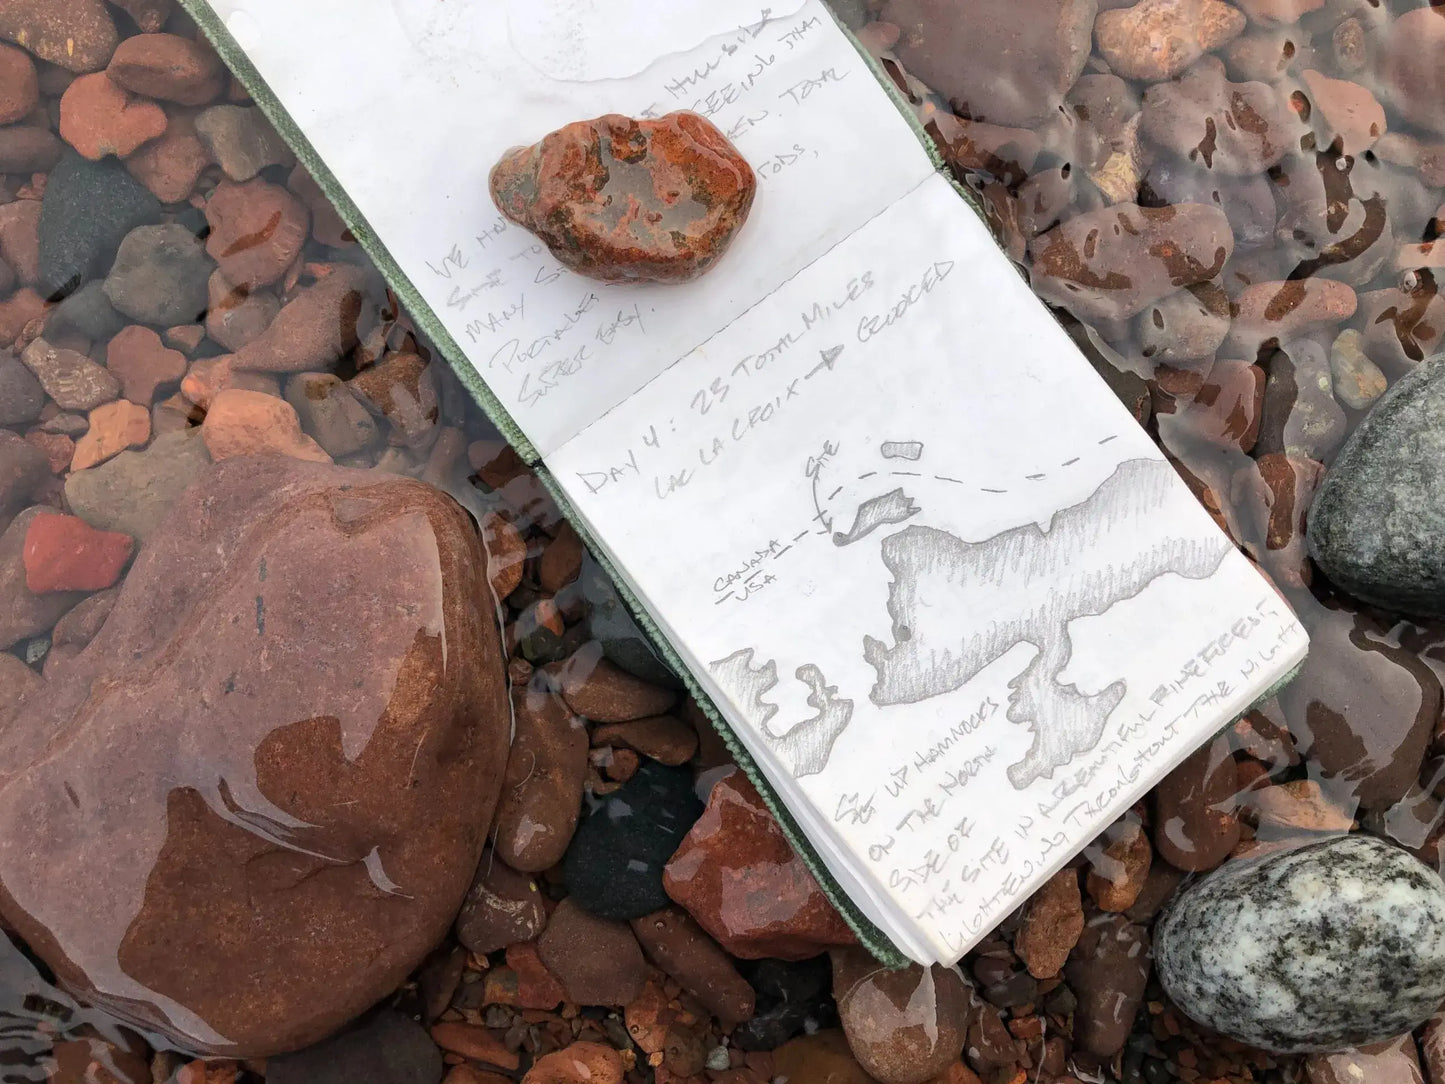 Notepad with writing on it in water with rocks.